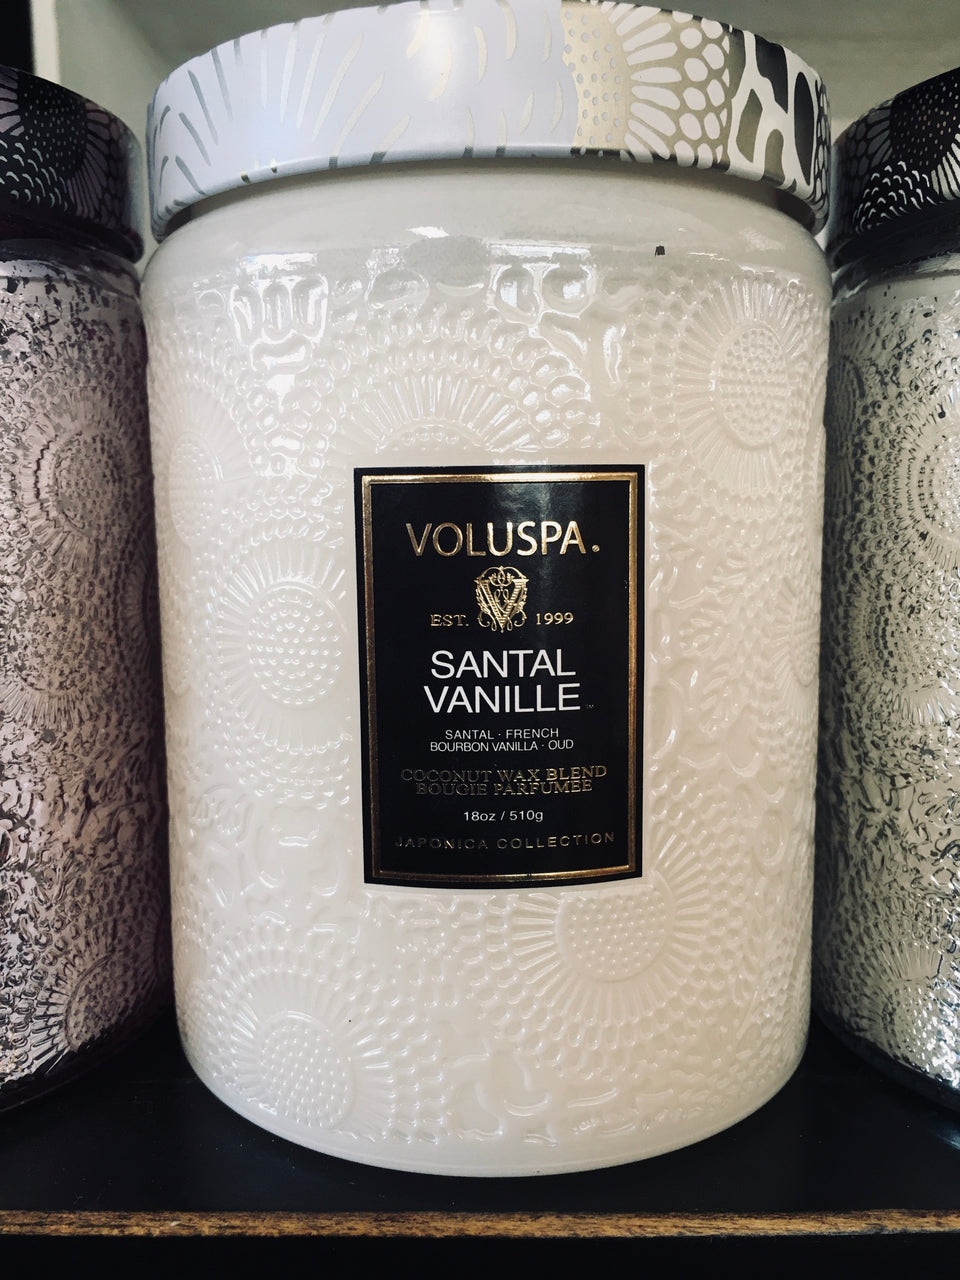 Voluspa tall candles in textured glass